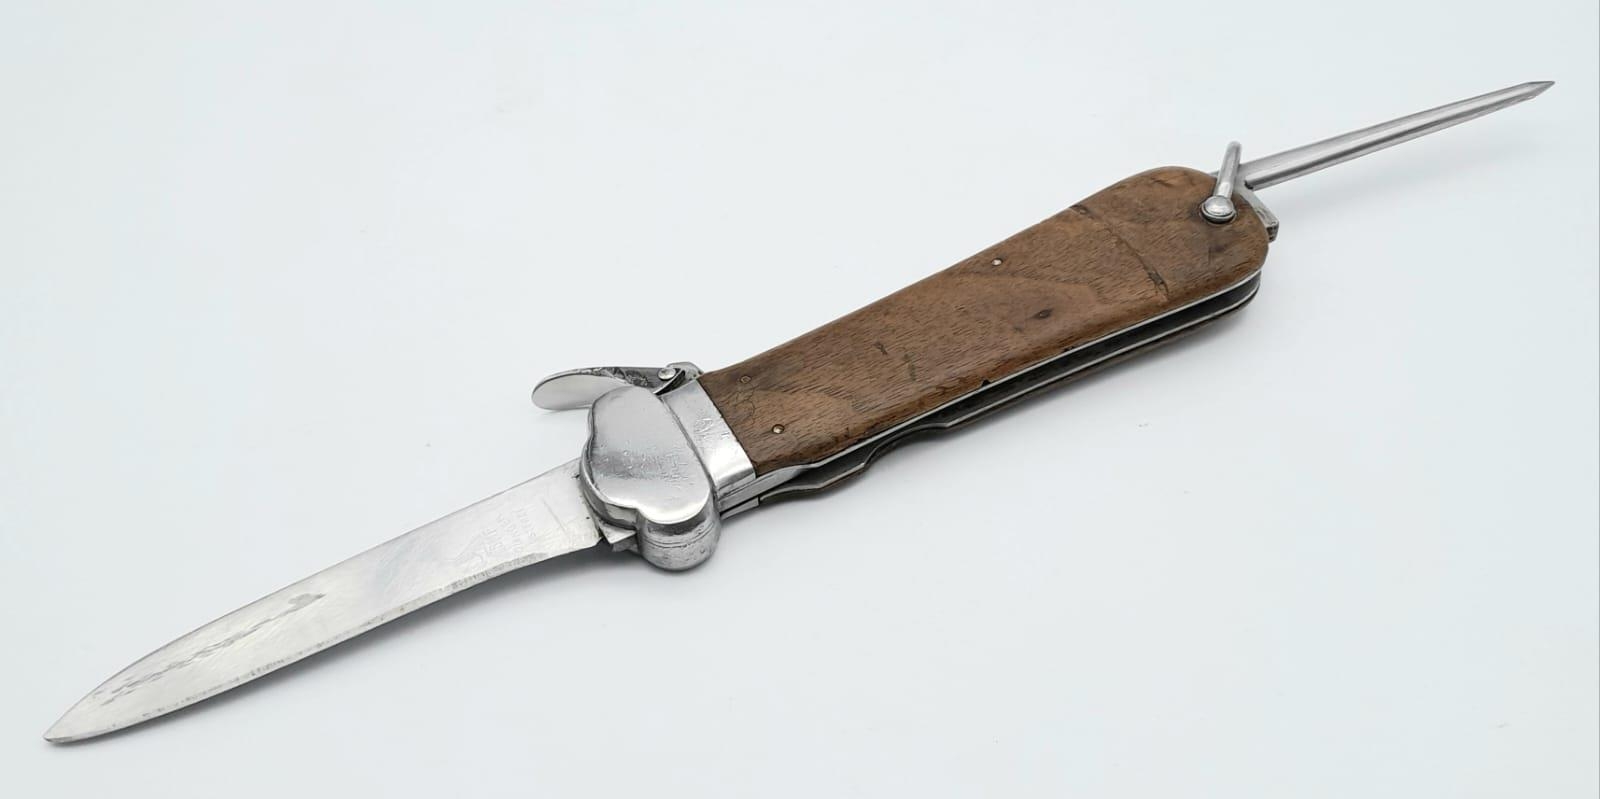 A German WW2 Luftwaffe Paratrooper Gravity Knife. Gravity action for blade release - built to get